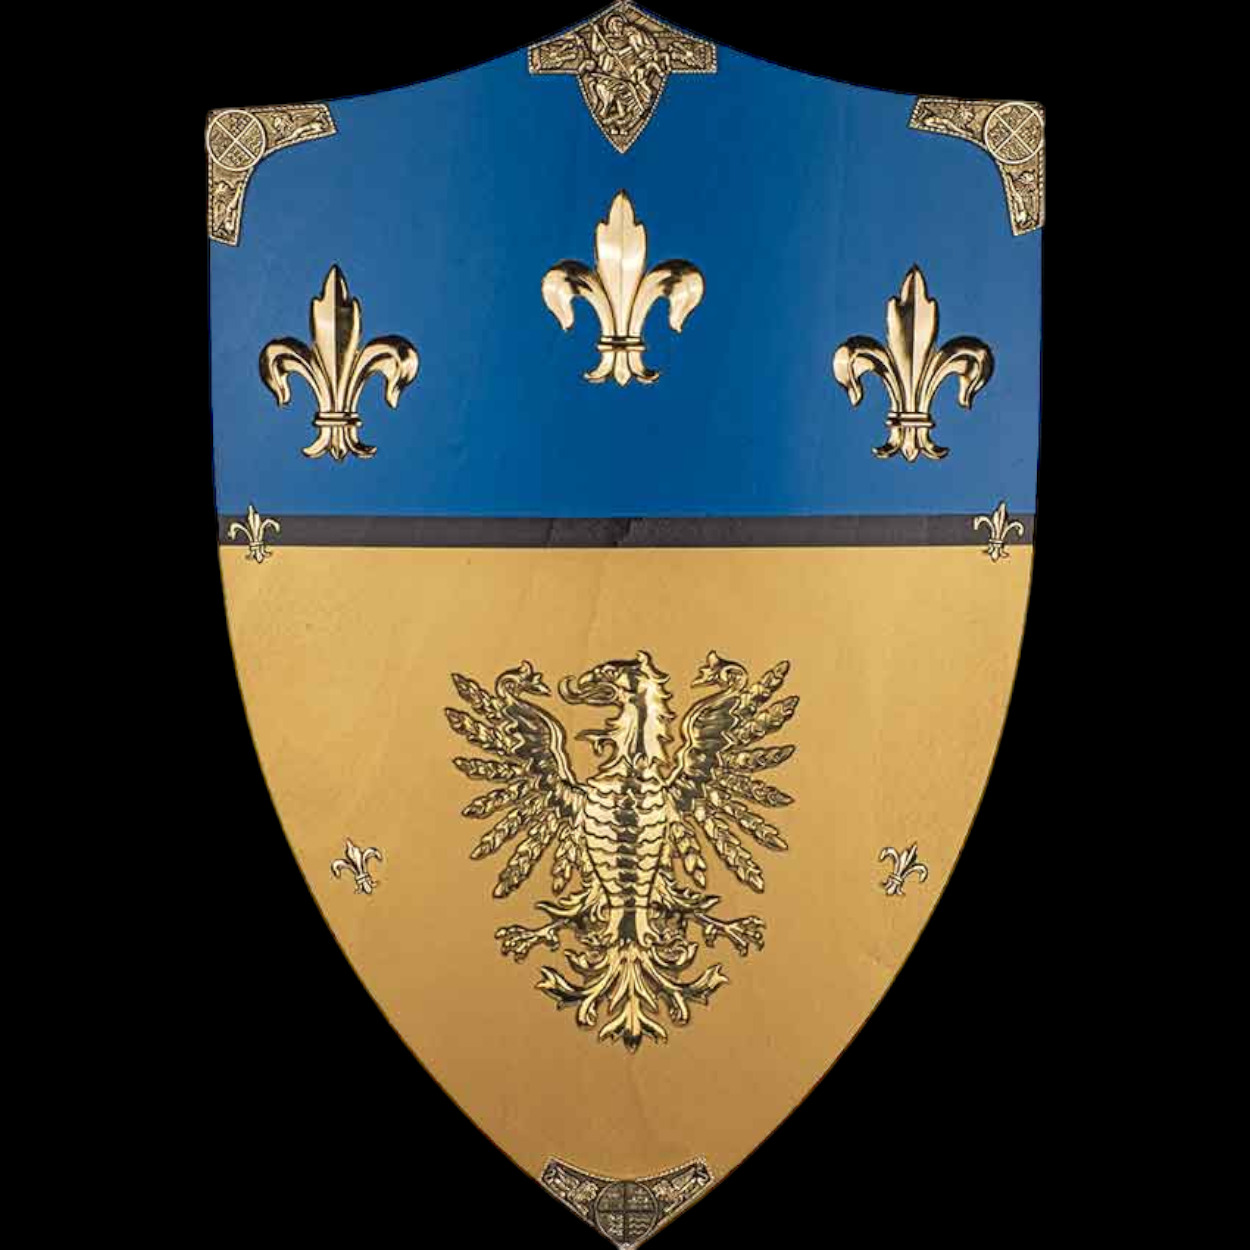 KNIGHT'S SHIELD OF CHARLES THE GREAT (876)